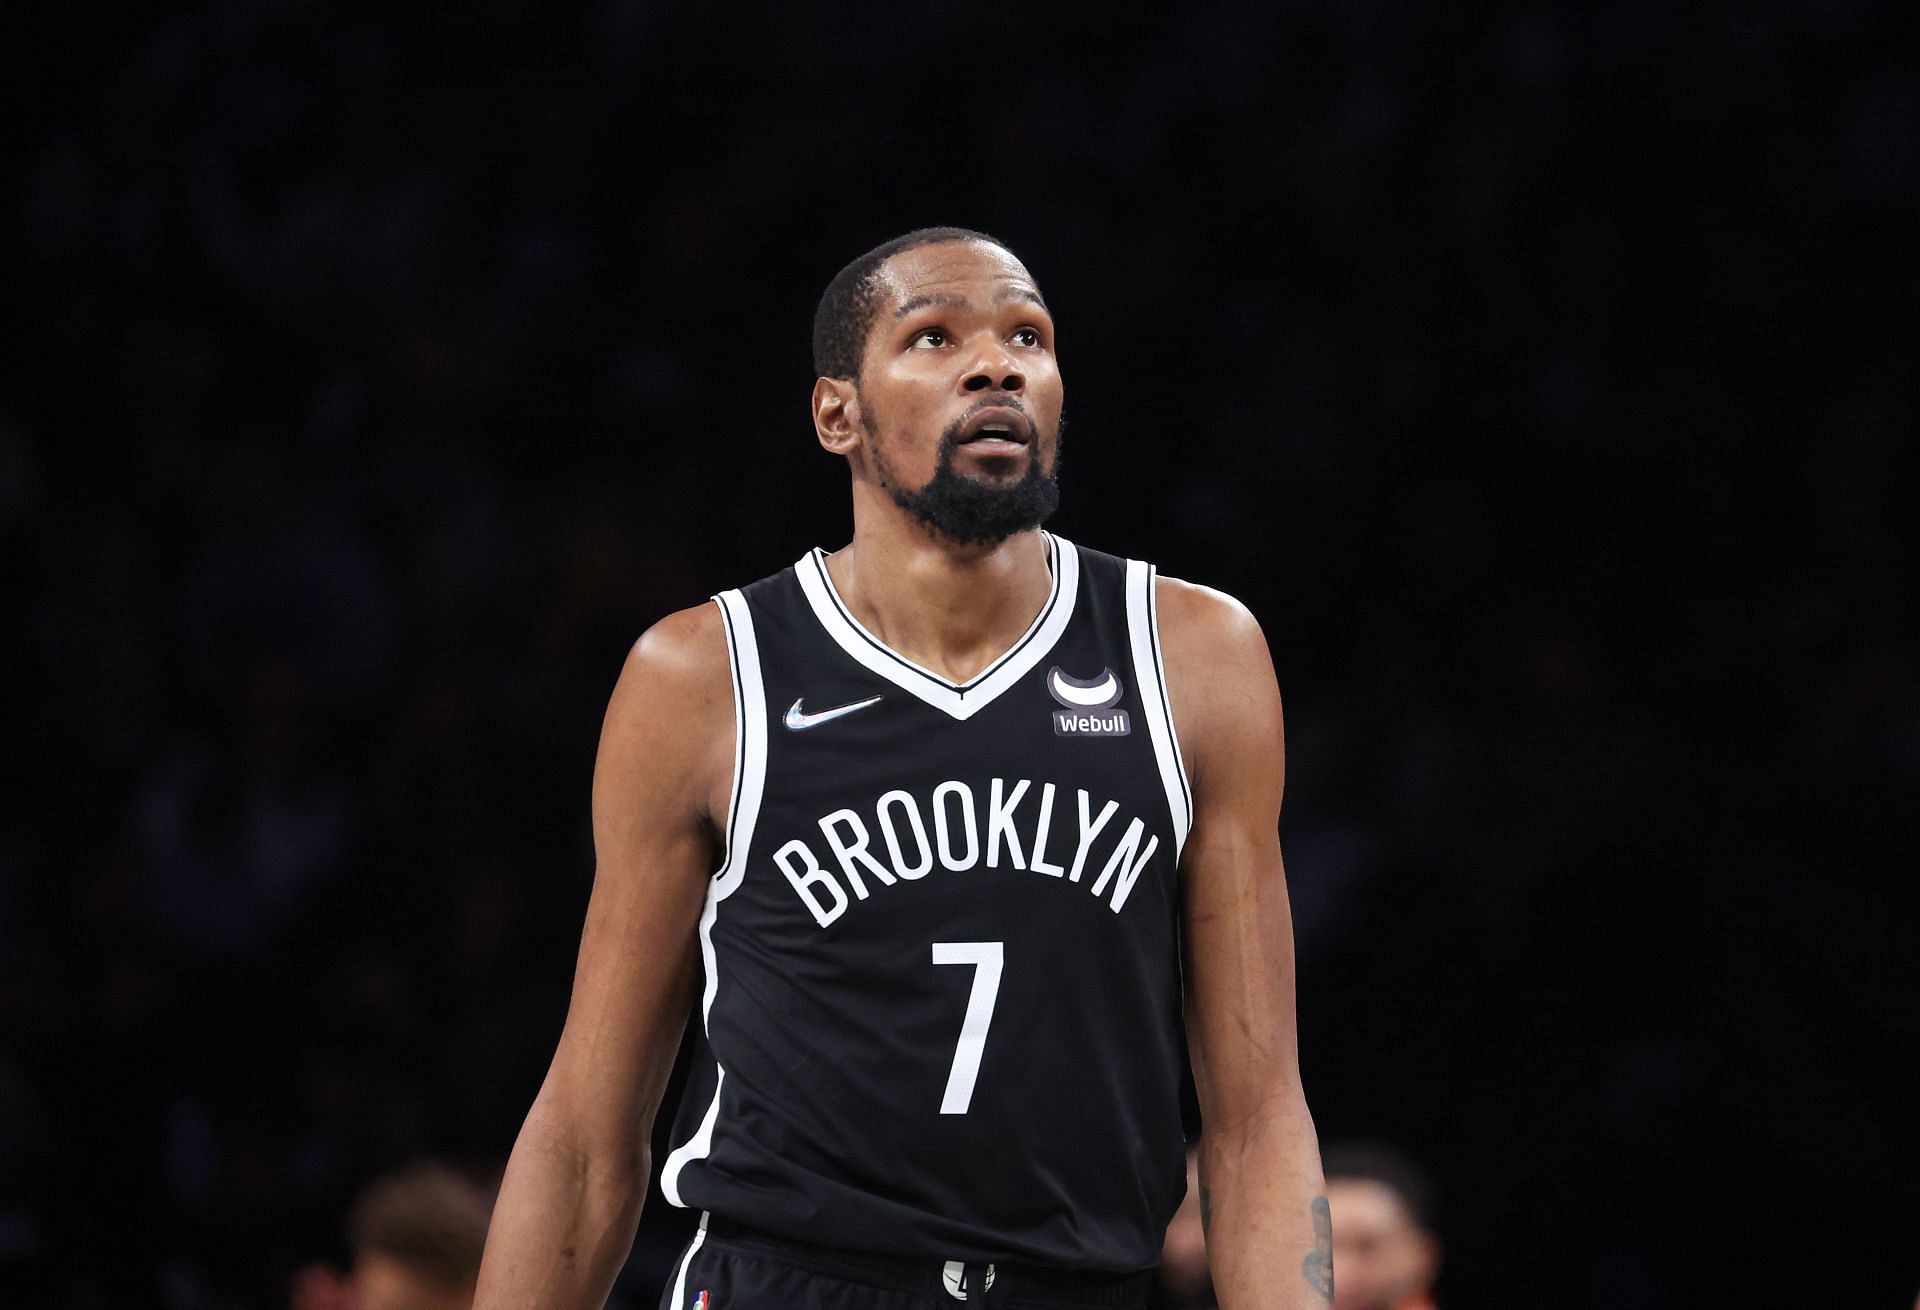 Kevin Durant of the Brooklyn Nets looks on against the Boston Celtics during Game 3 of the Eastern Conference first round on April 23 in New York City.